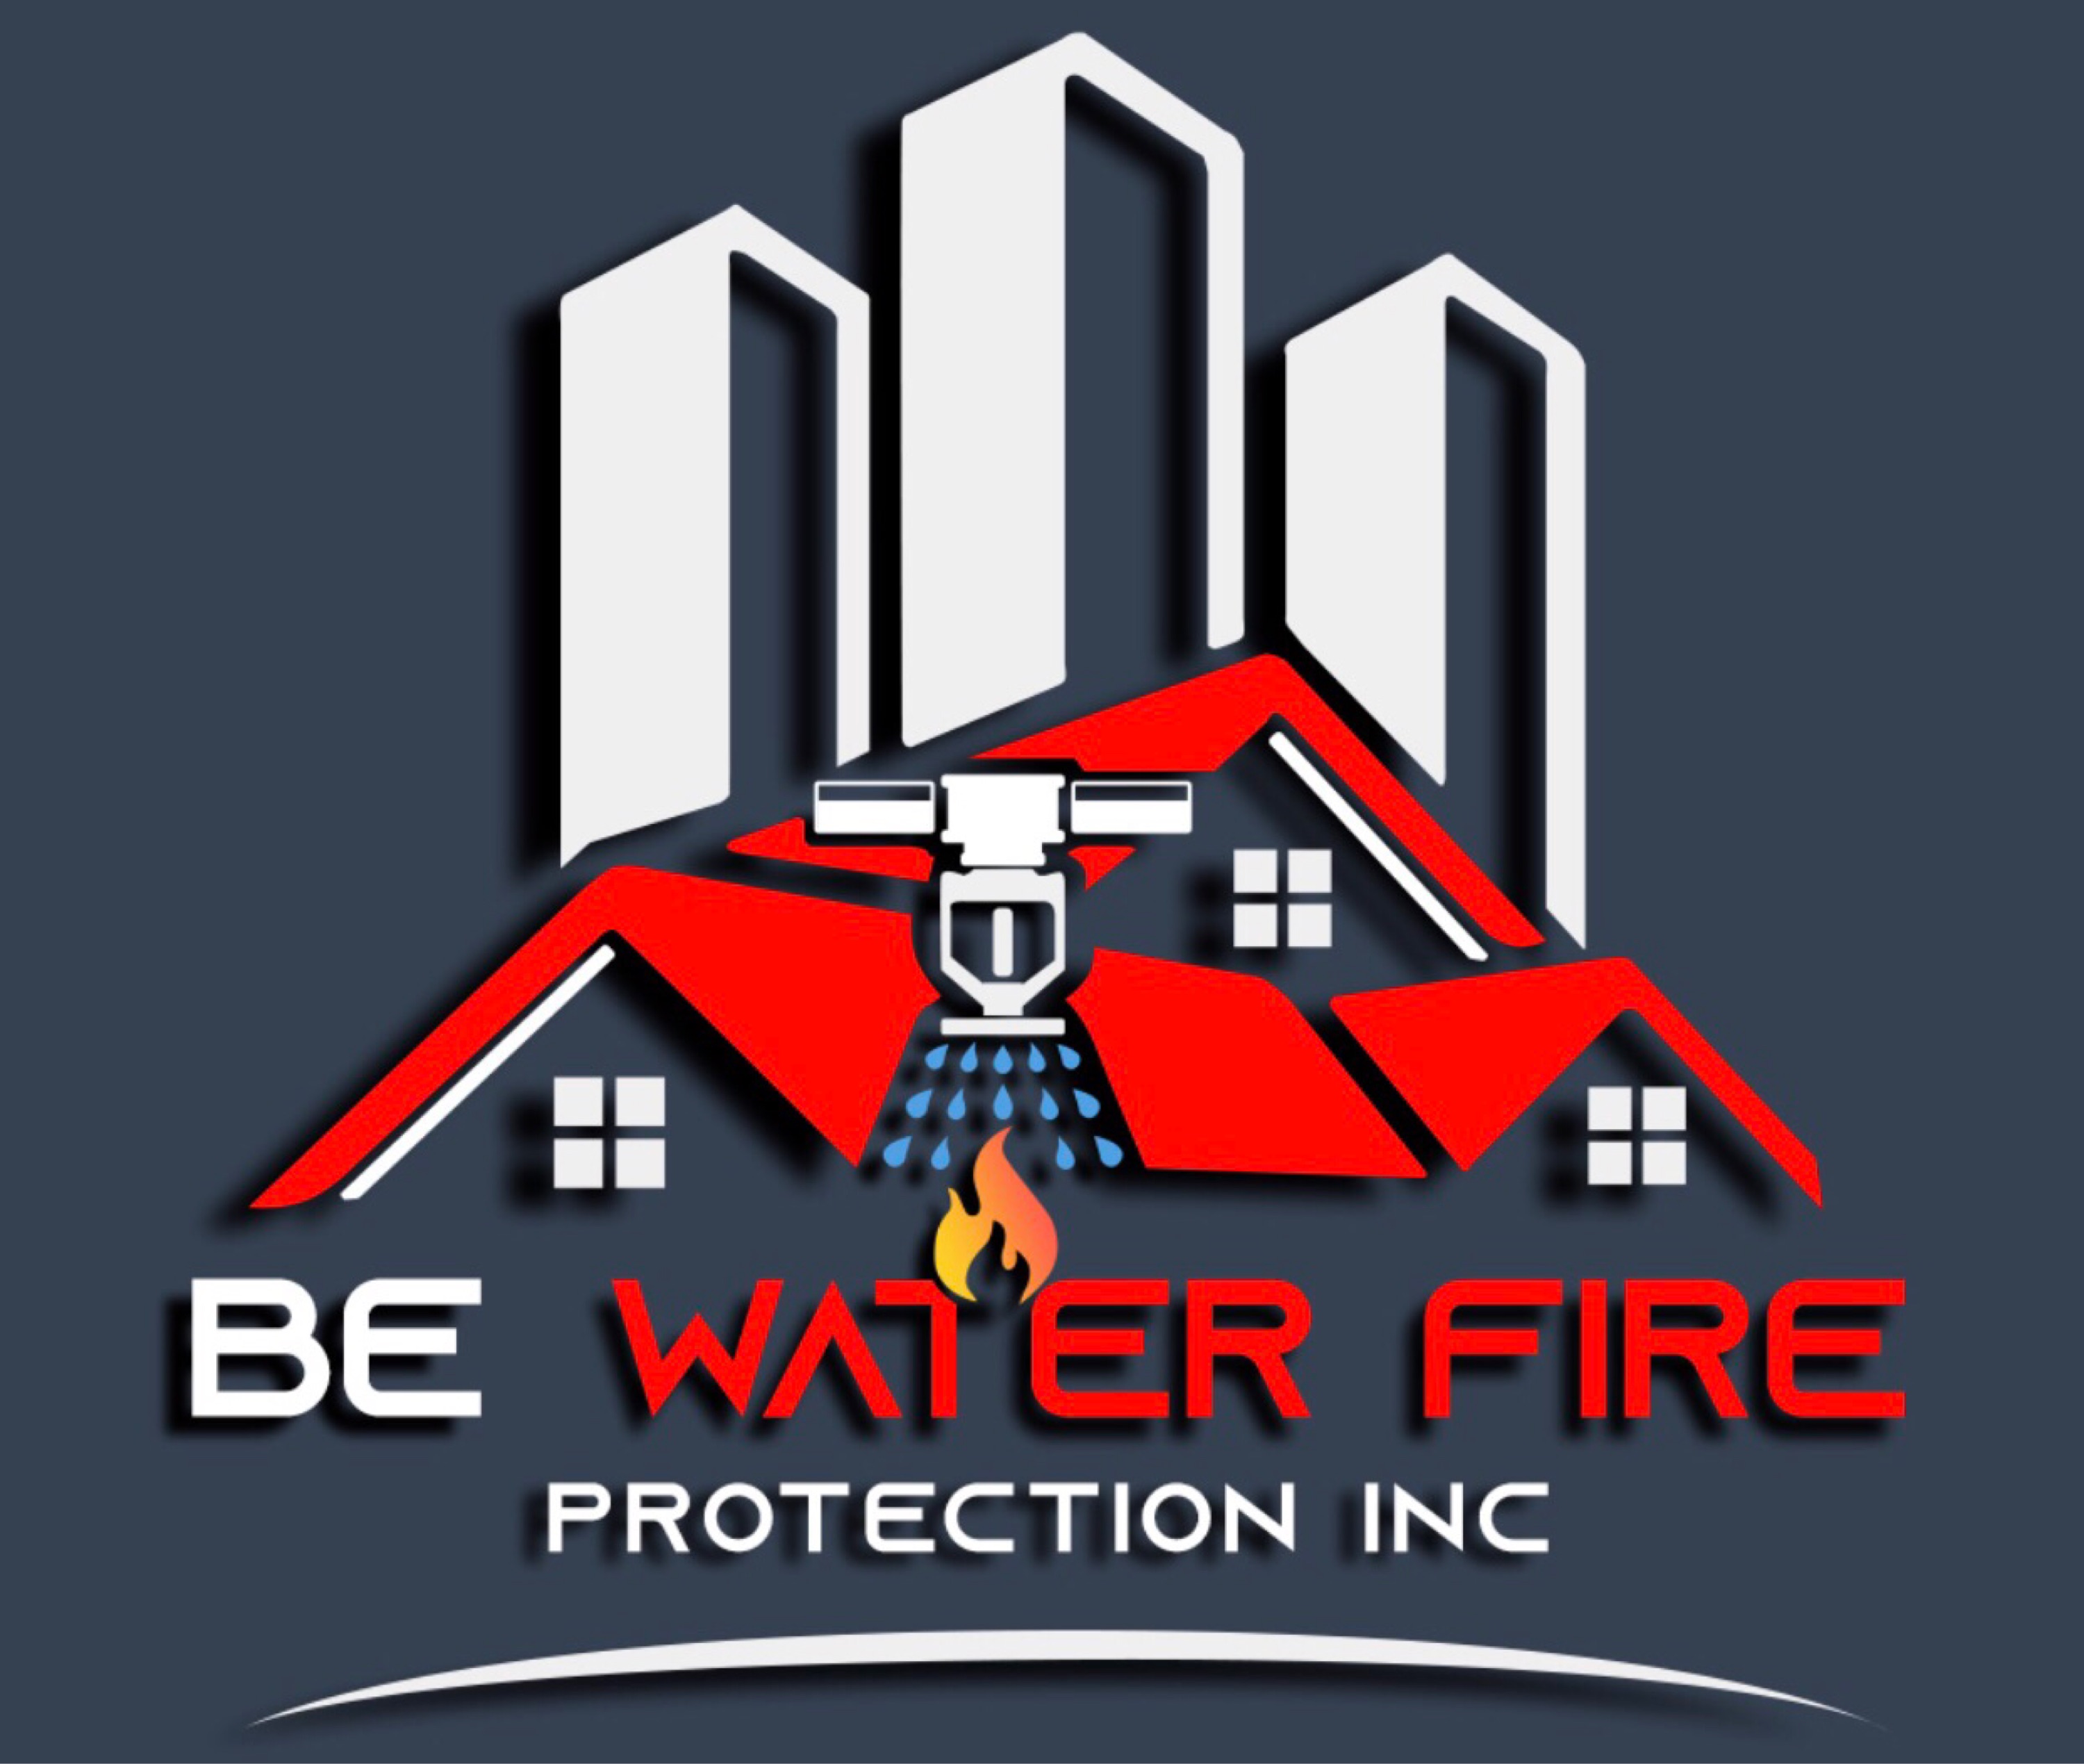 Be Water Fire Protection Logo